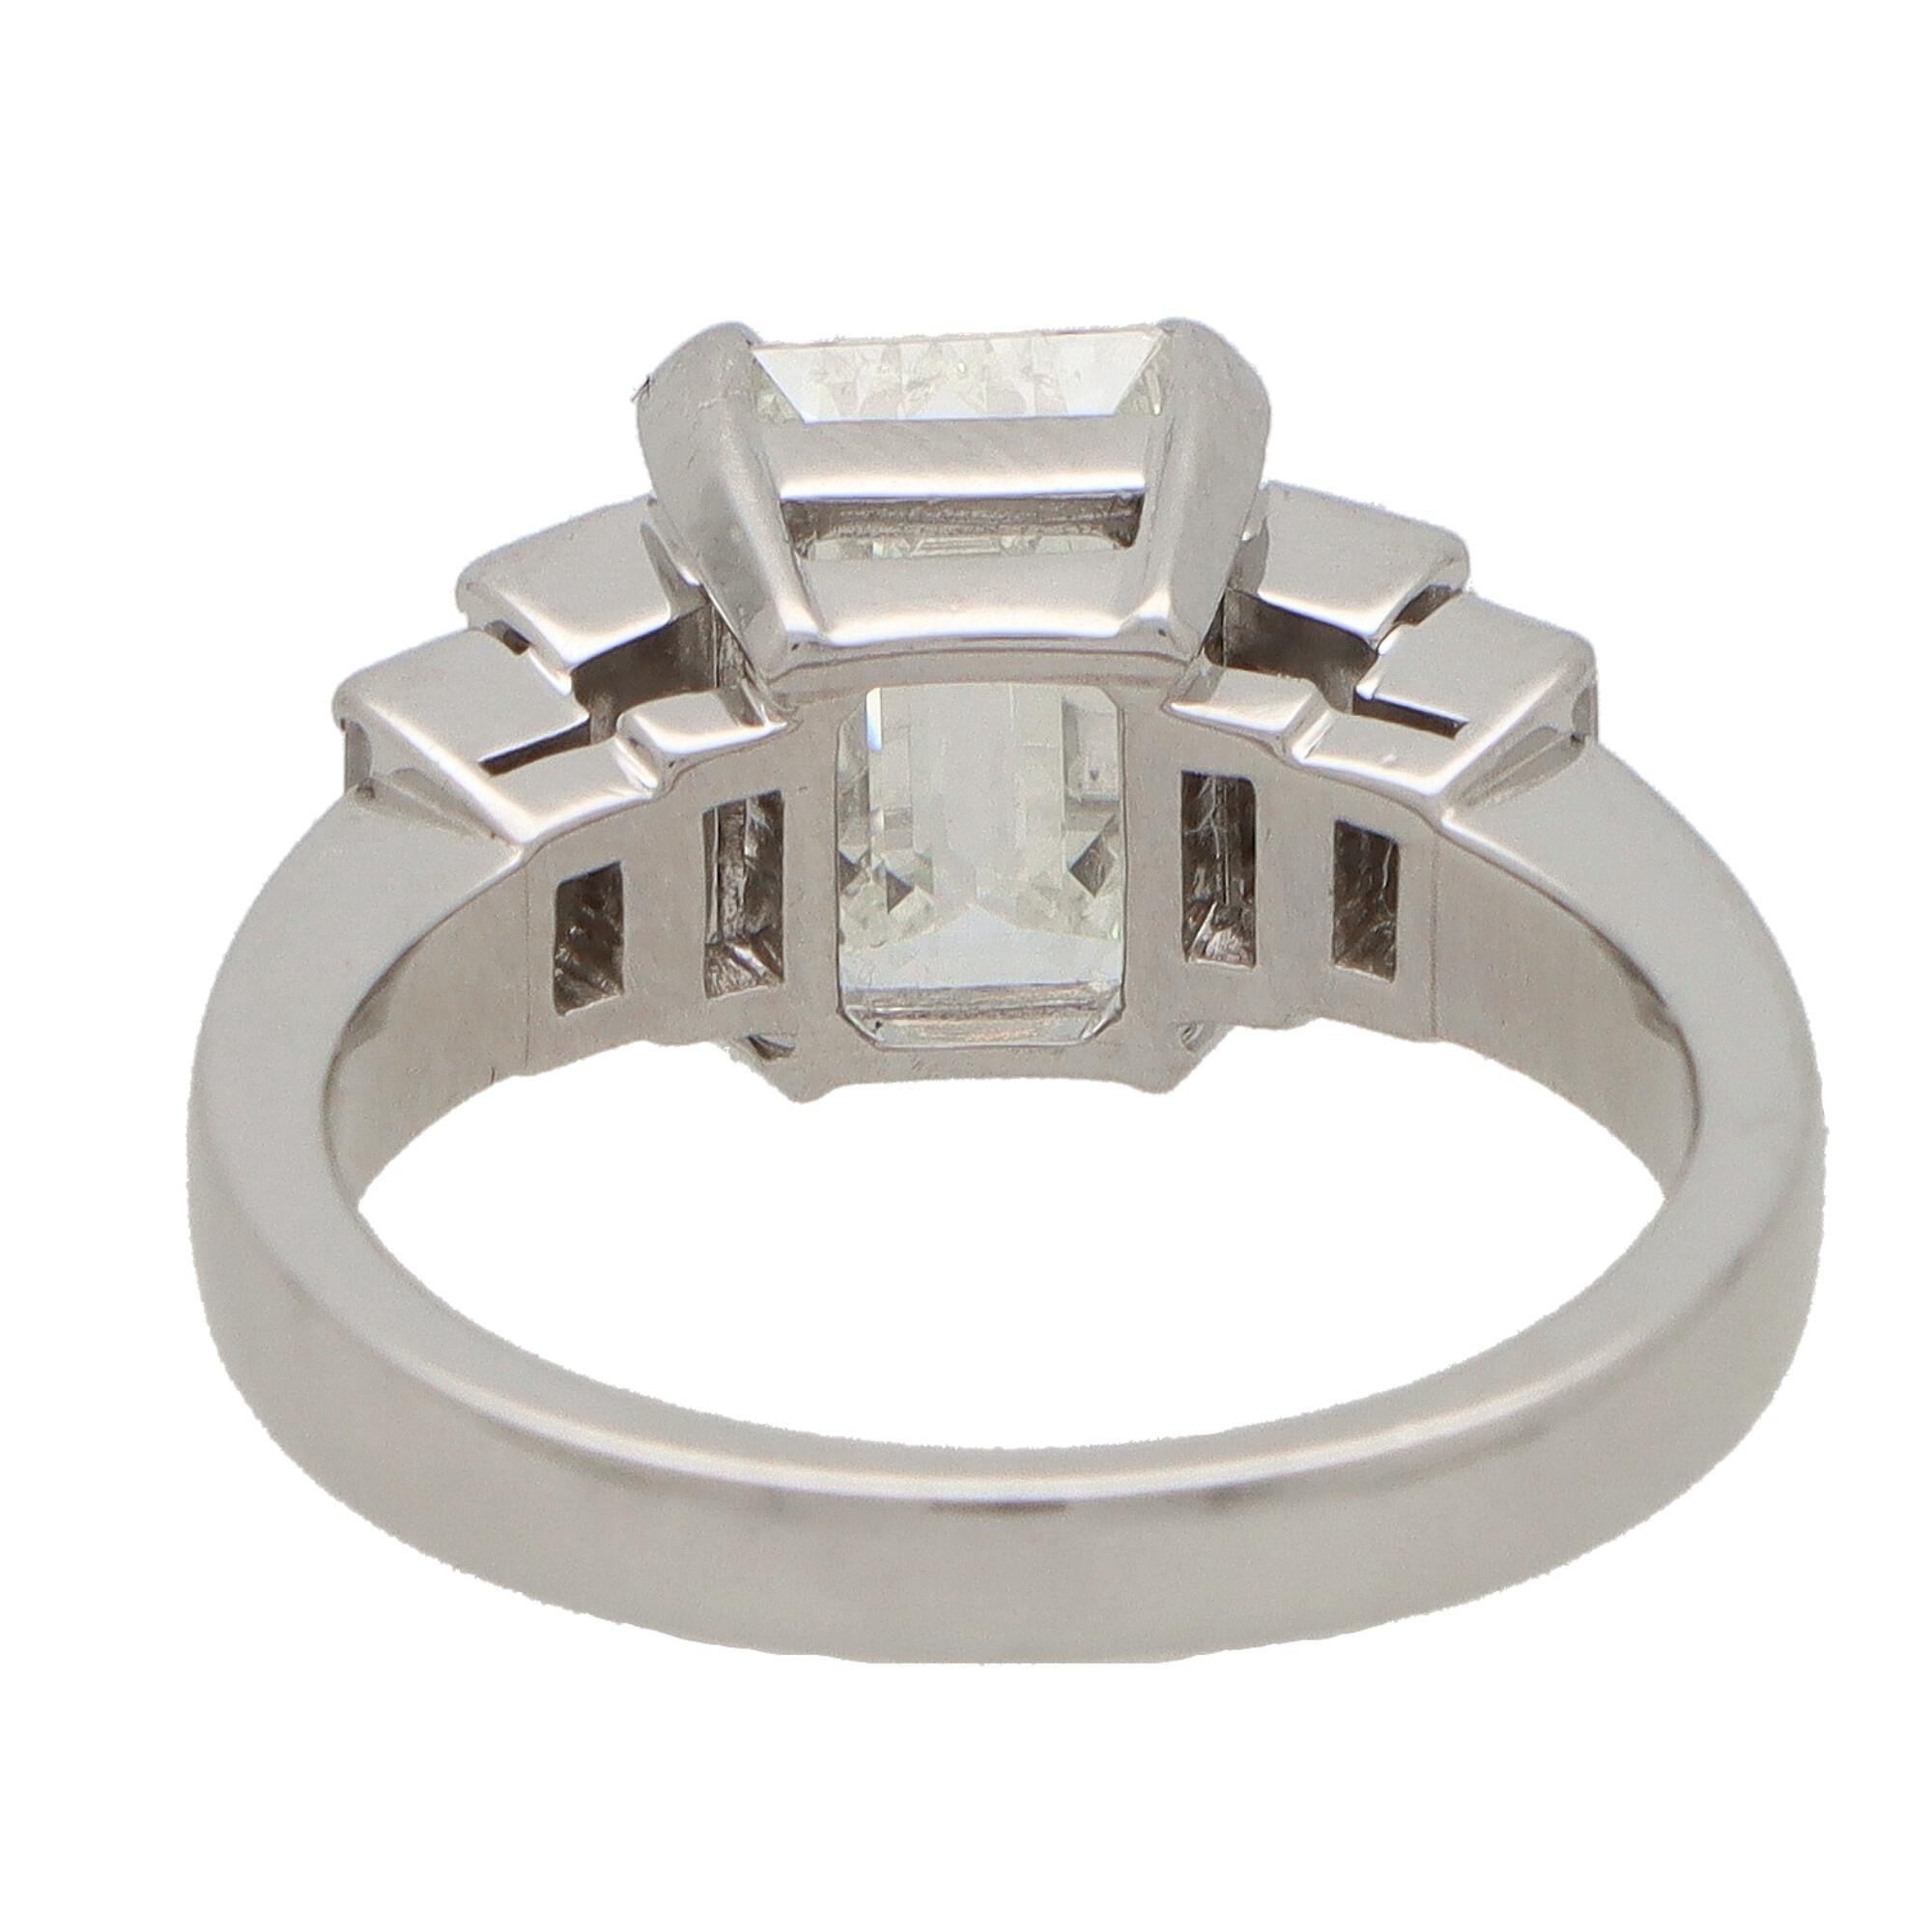 2.48 Carat Emerald Cut and Baguette Cut Diamond Ring Set in Platinum In Excellent Condition For Sale In London, GB